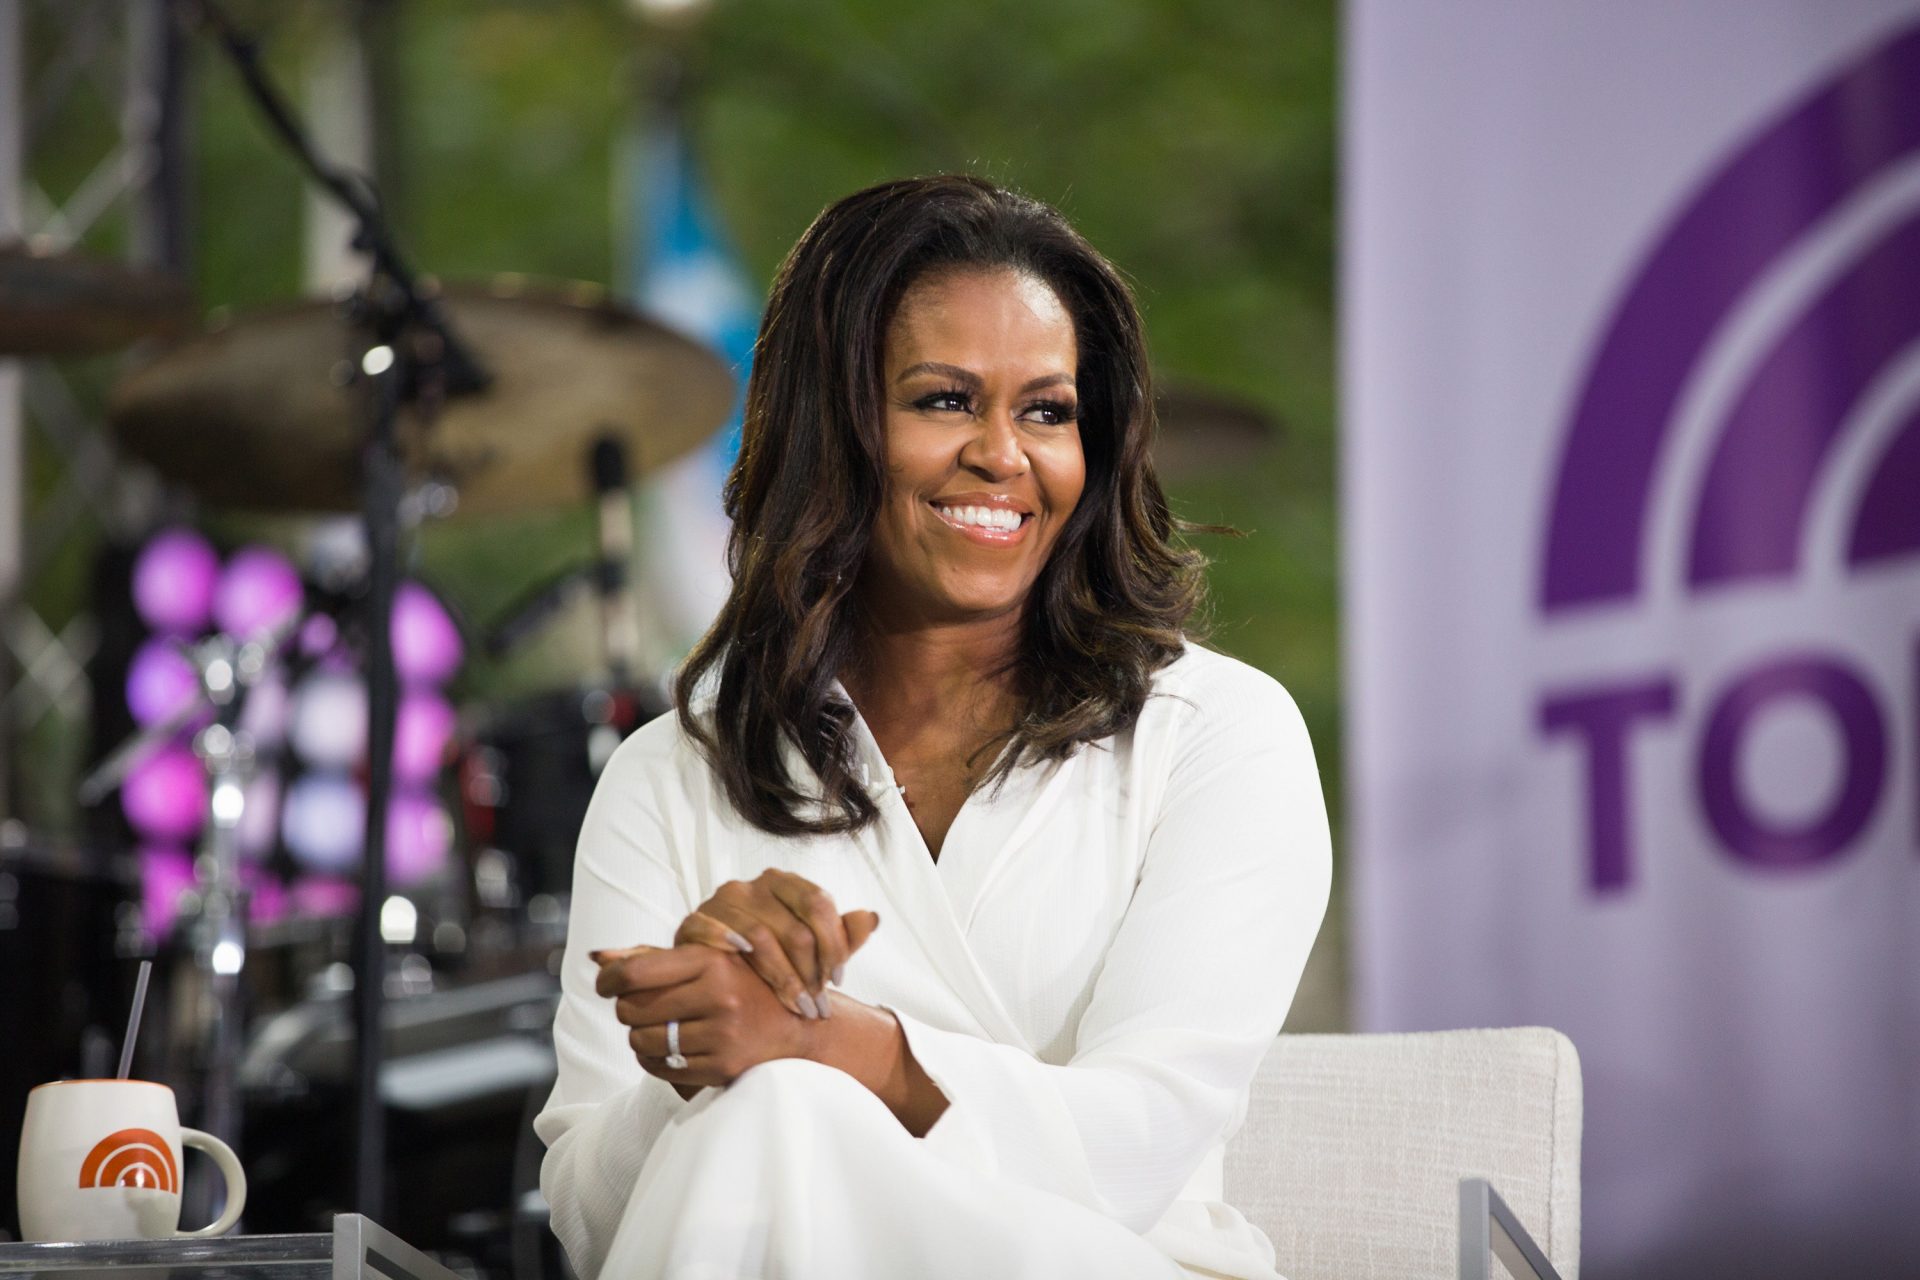 Michelle Obama Acknowledged She’s Dealing With ‘Low-Grade Depression’ in Quarantine